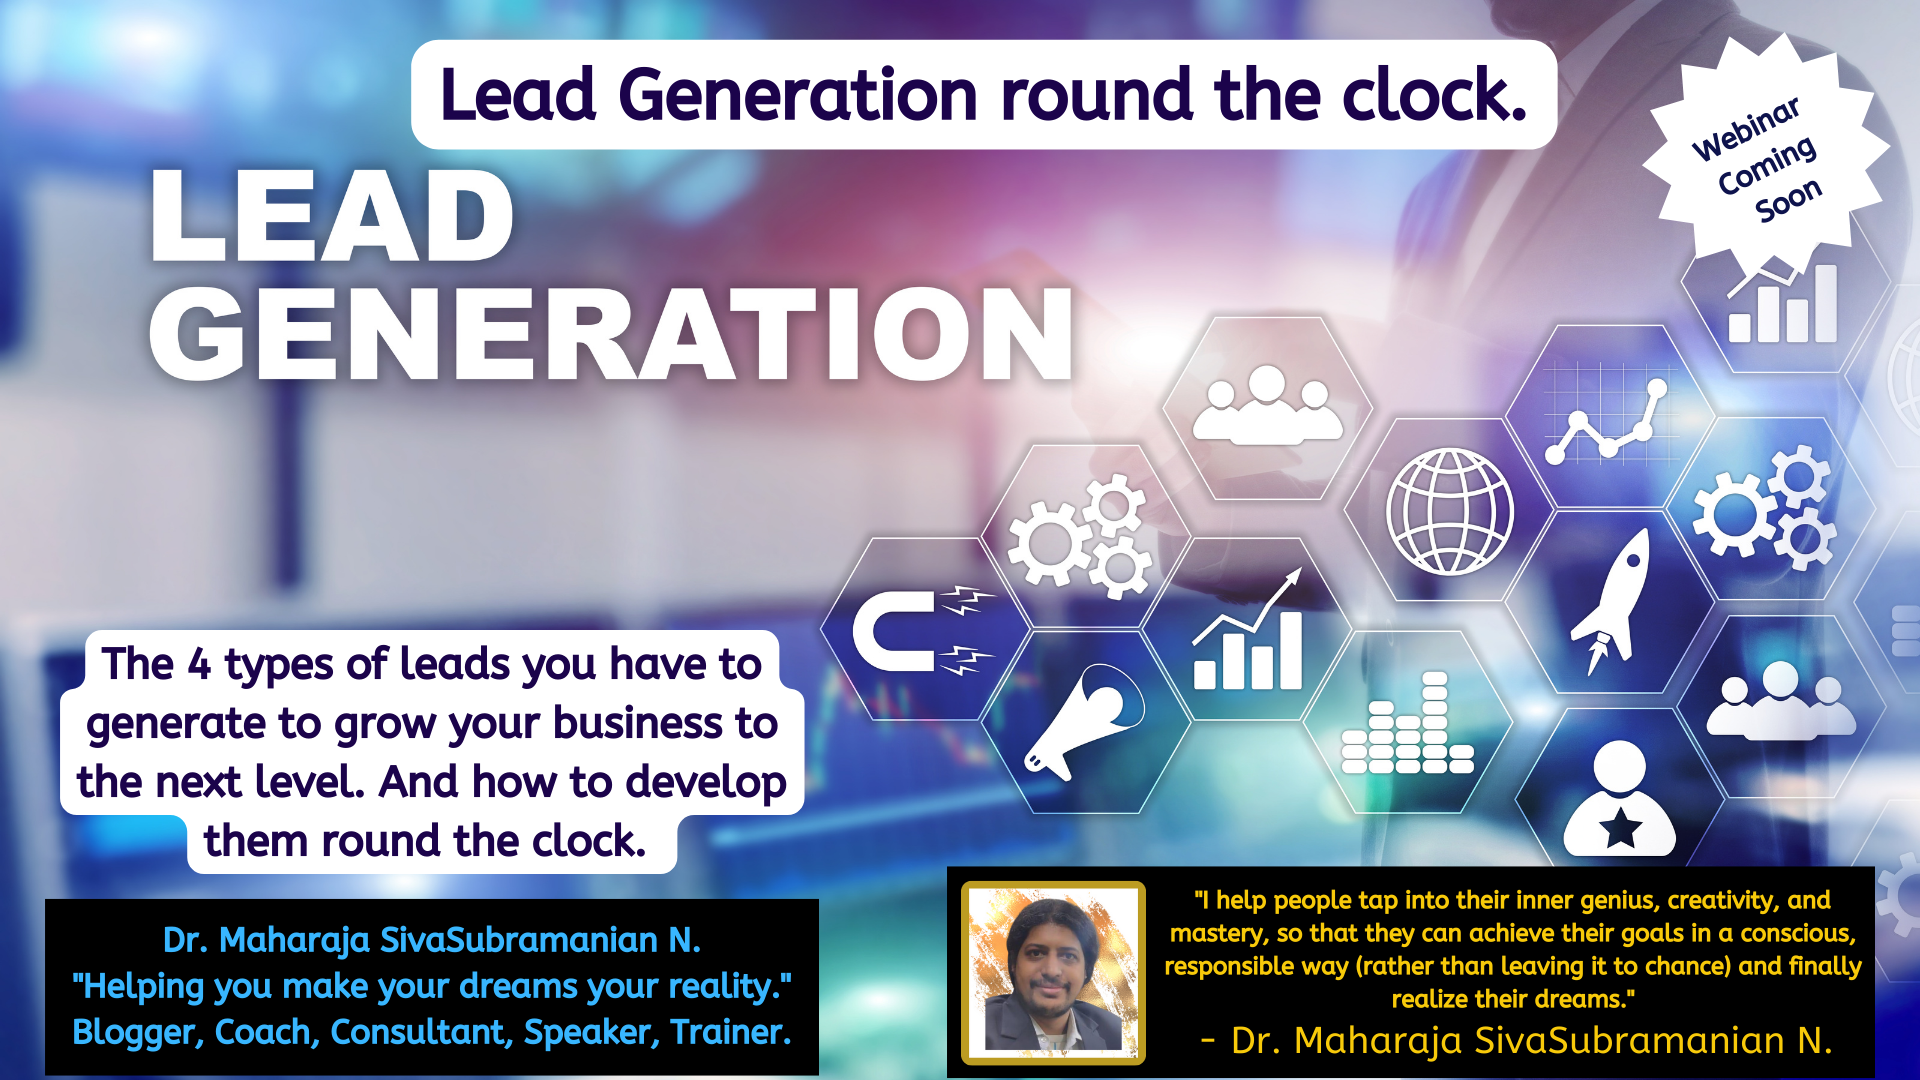 Lead Generation round the clock for Content Creators. – Upcoming free webinar.